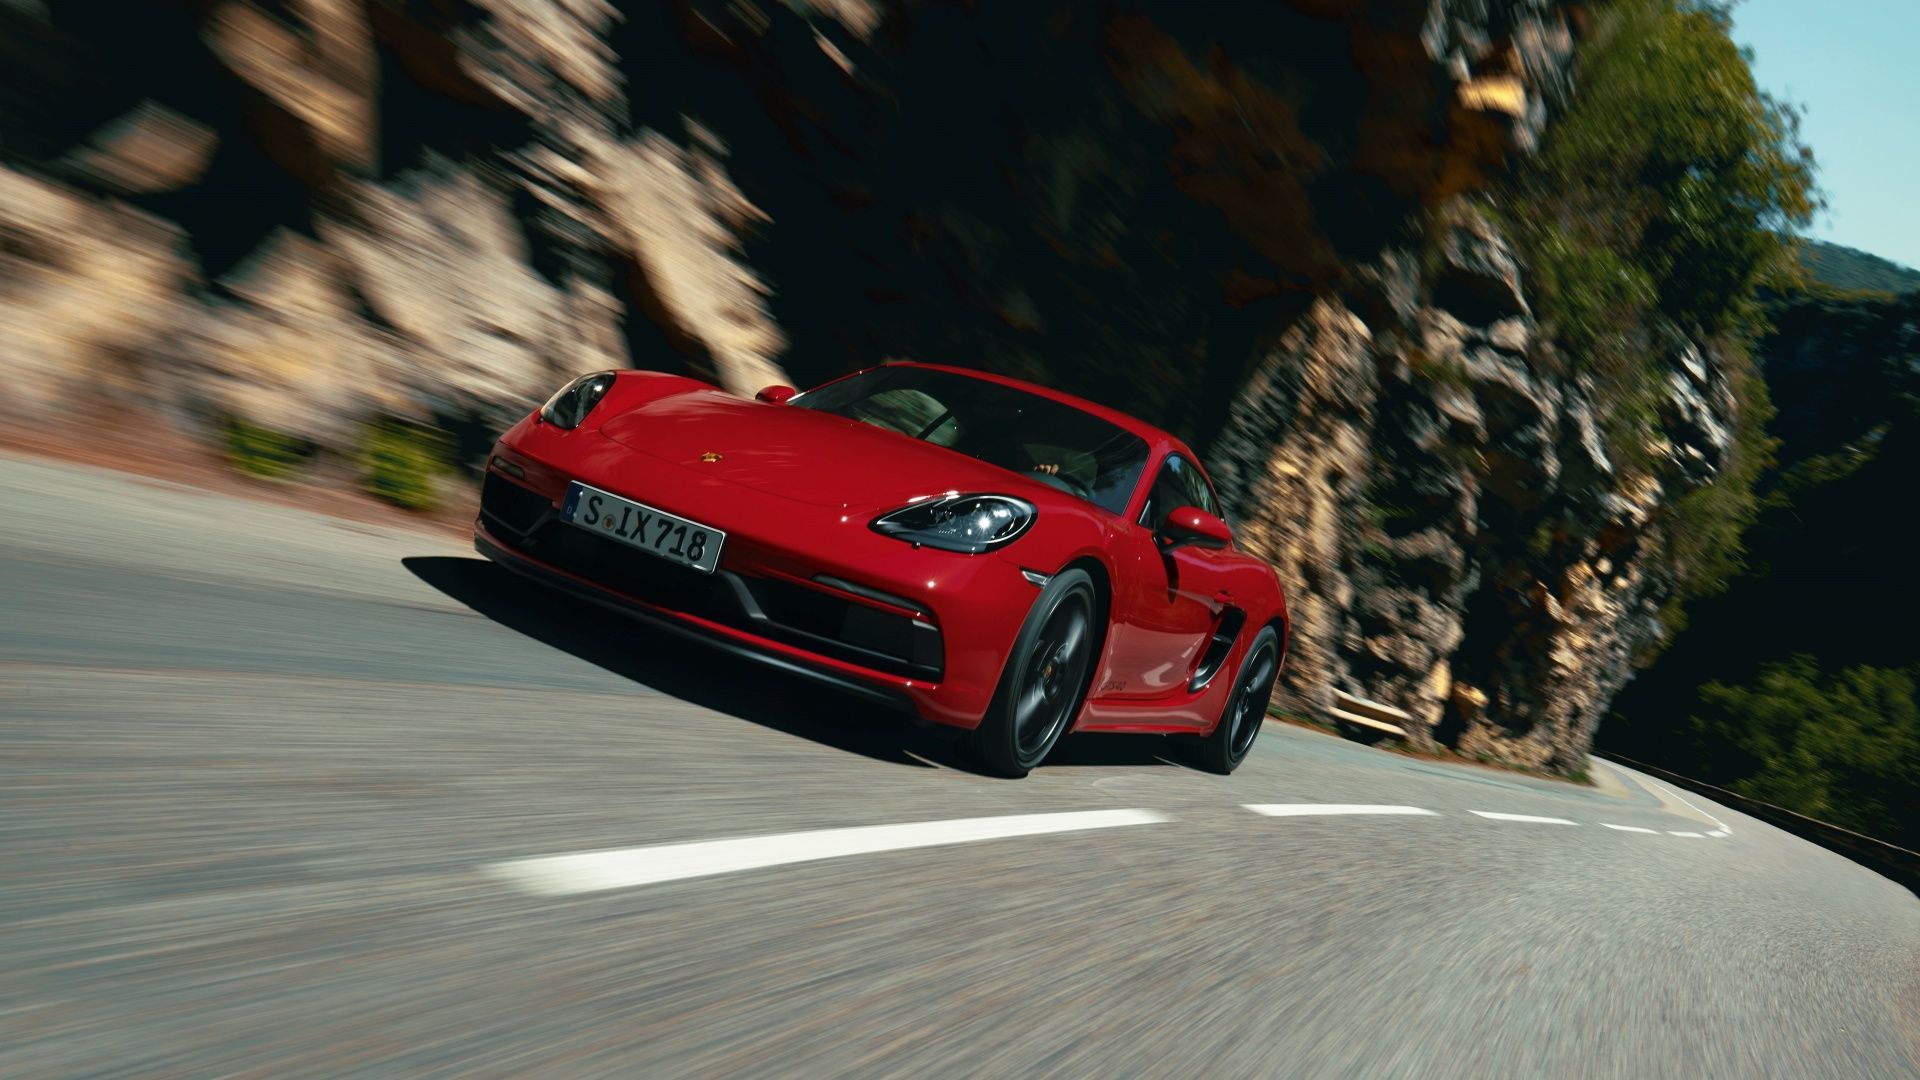 An action front 3/4 shot of a red Porsche 718 Cayman GTS 4.0 on the road